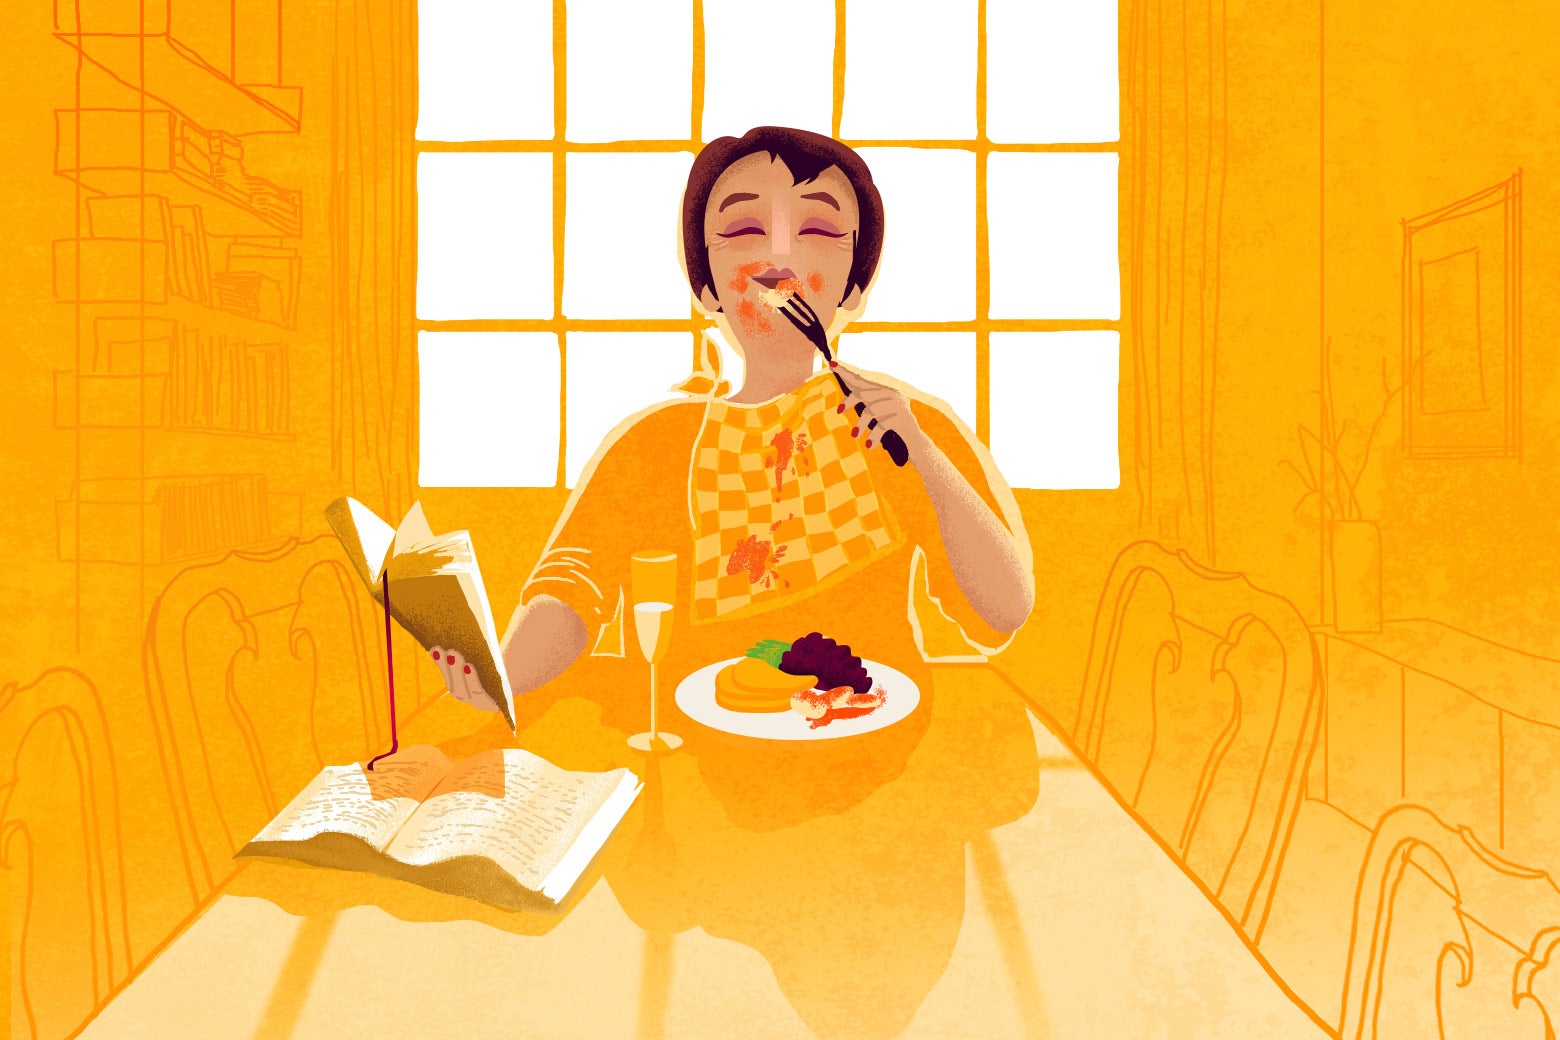 A woman sitting at Thanksgiving dinner alone, reading a book and looking happy